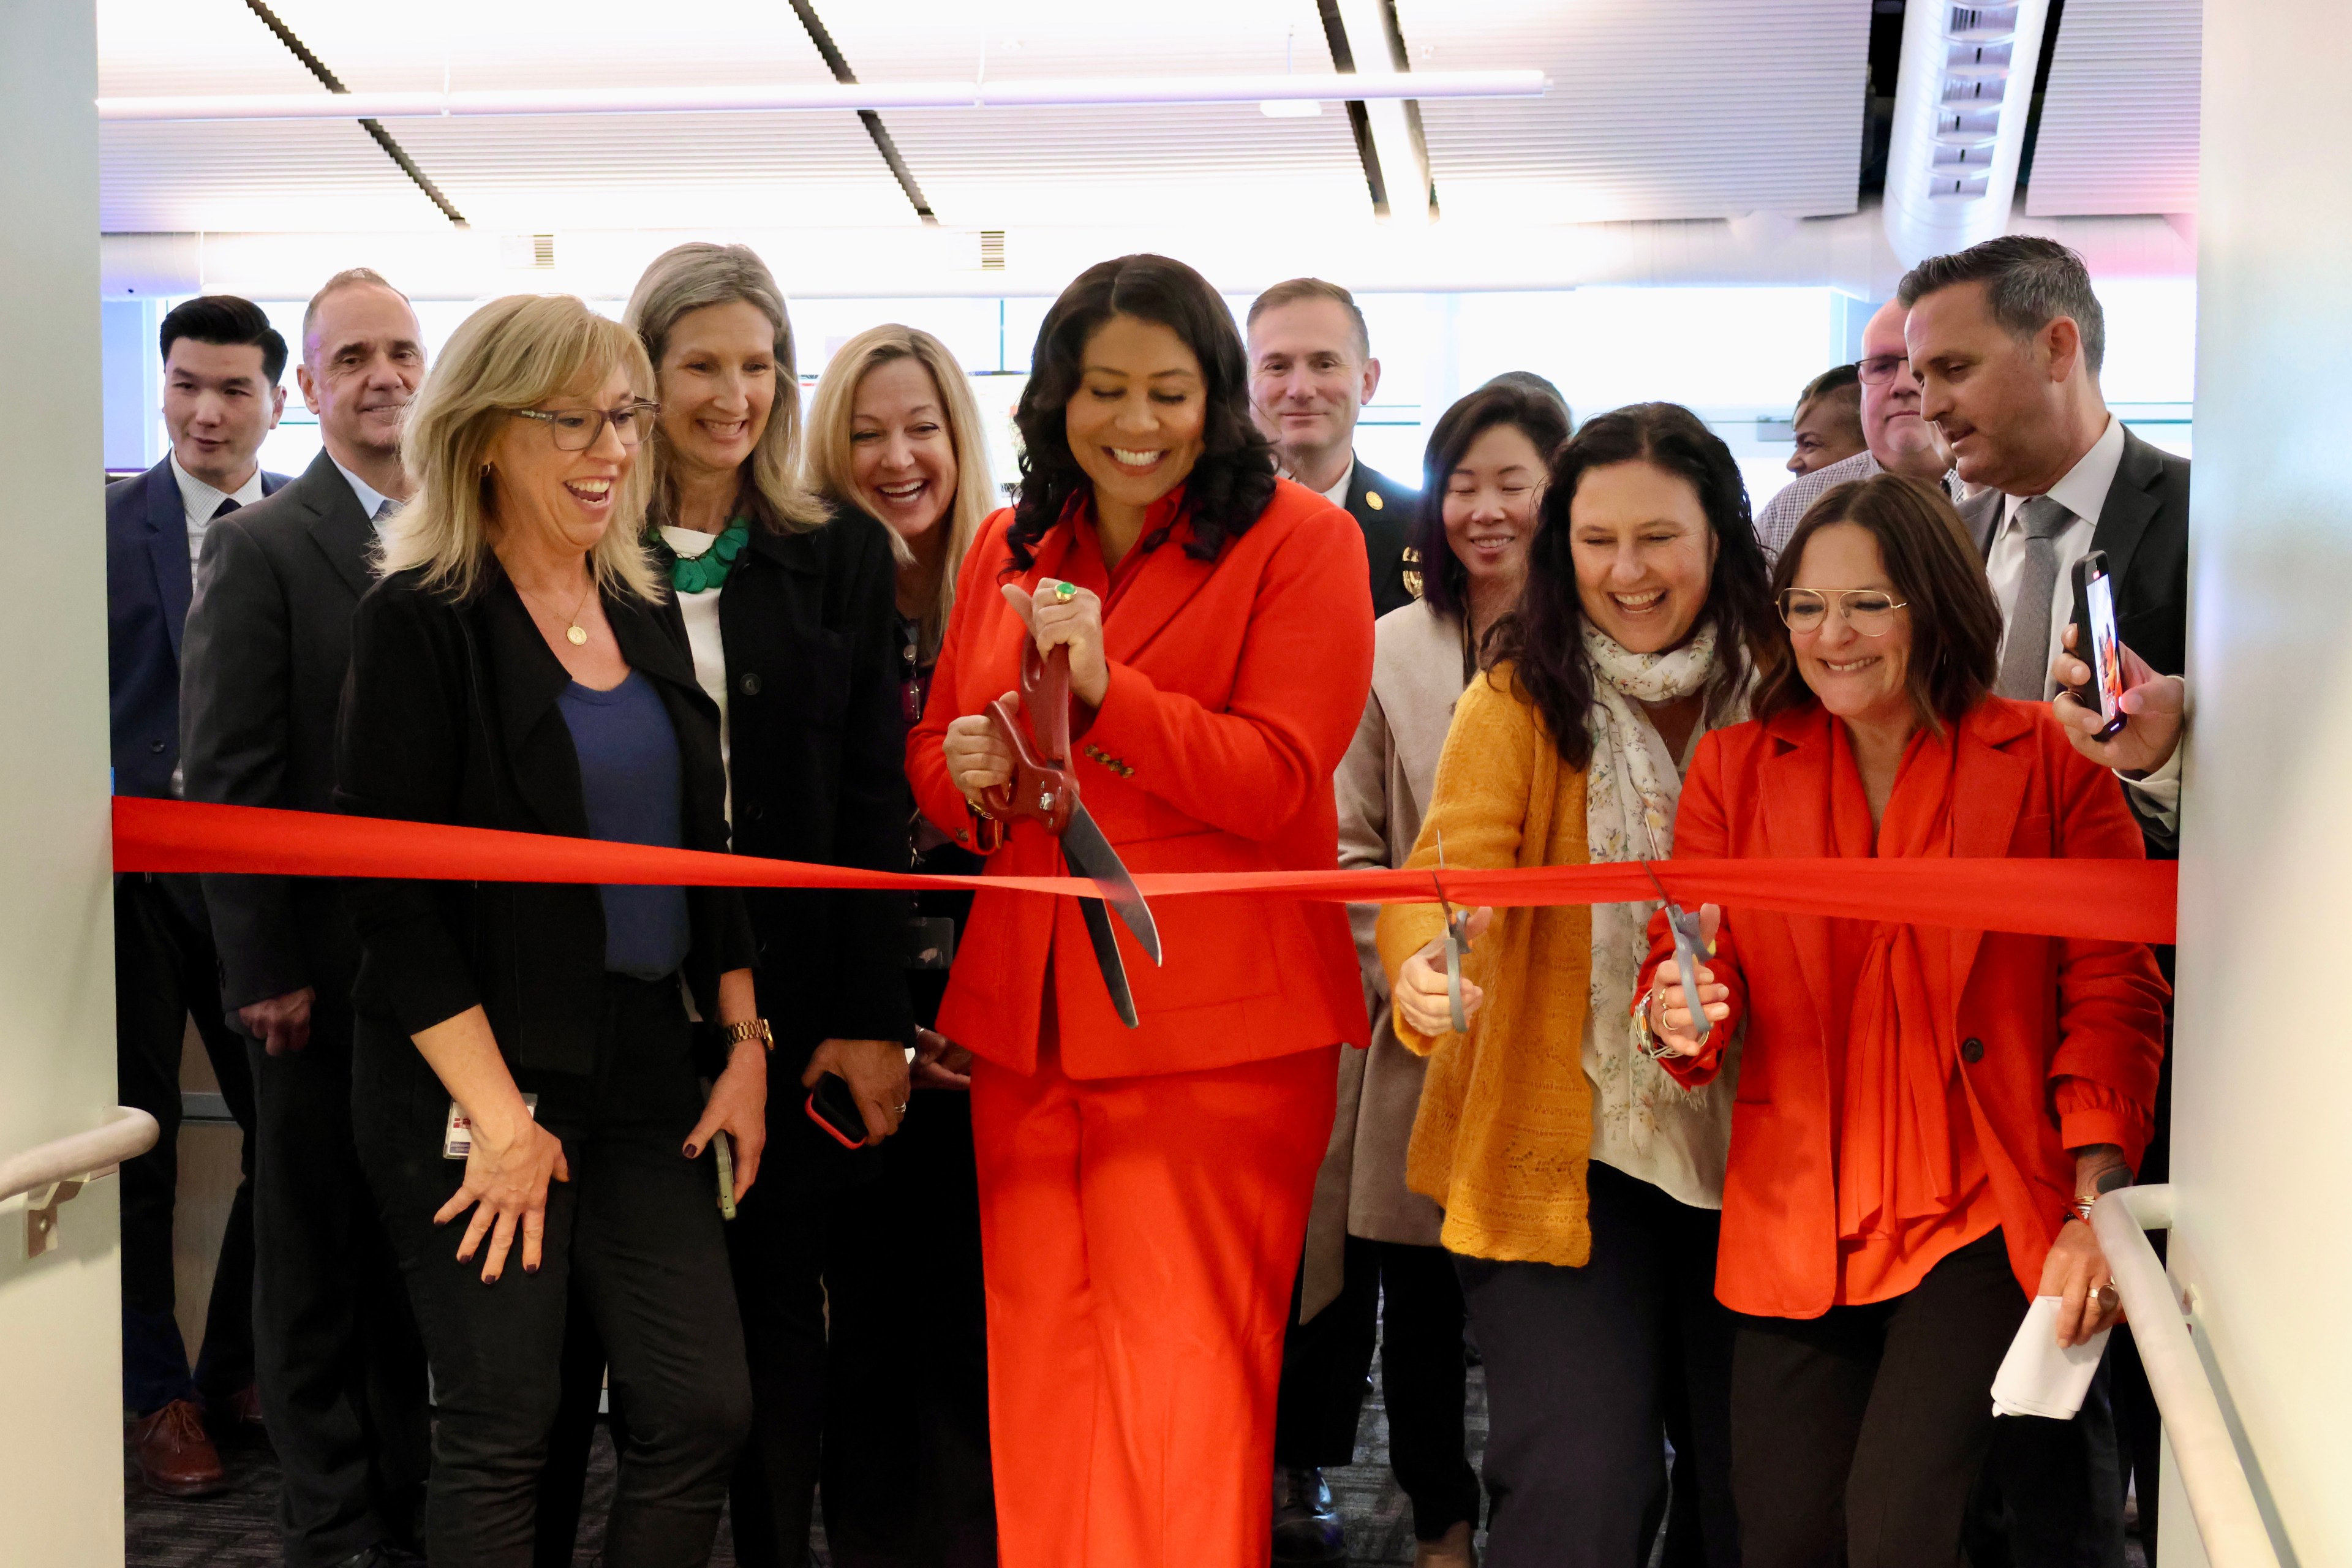 A group of smiling people watching a woman in a red suit cutting a ceremonial red ribbon.